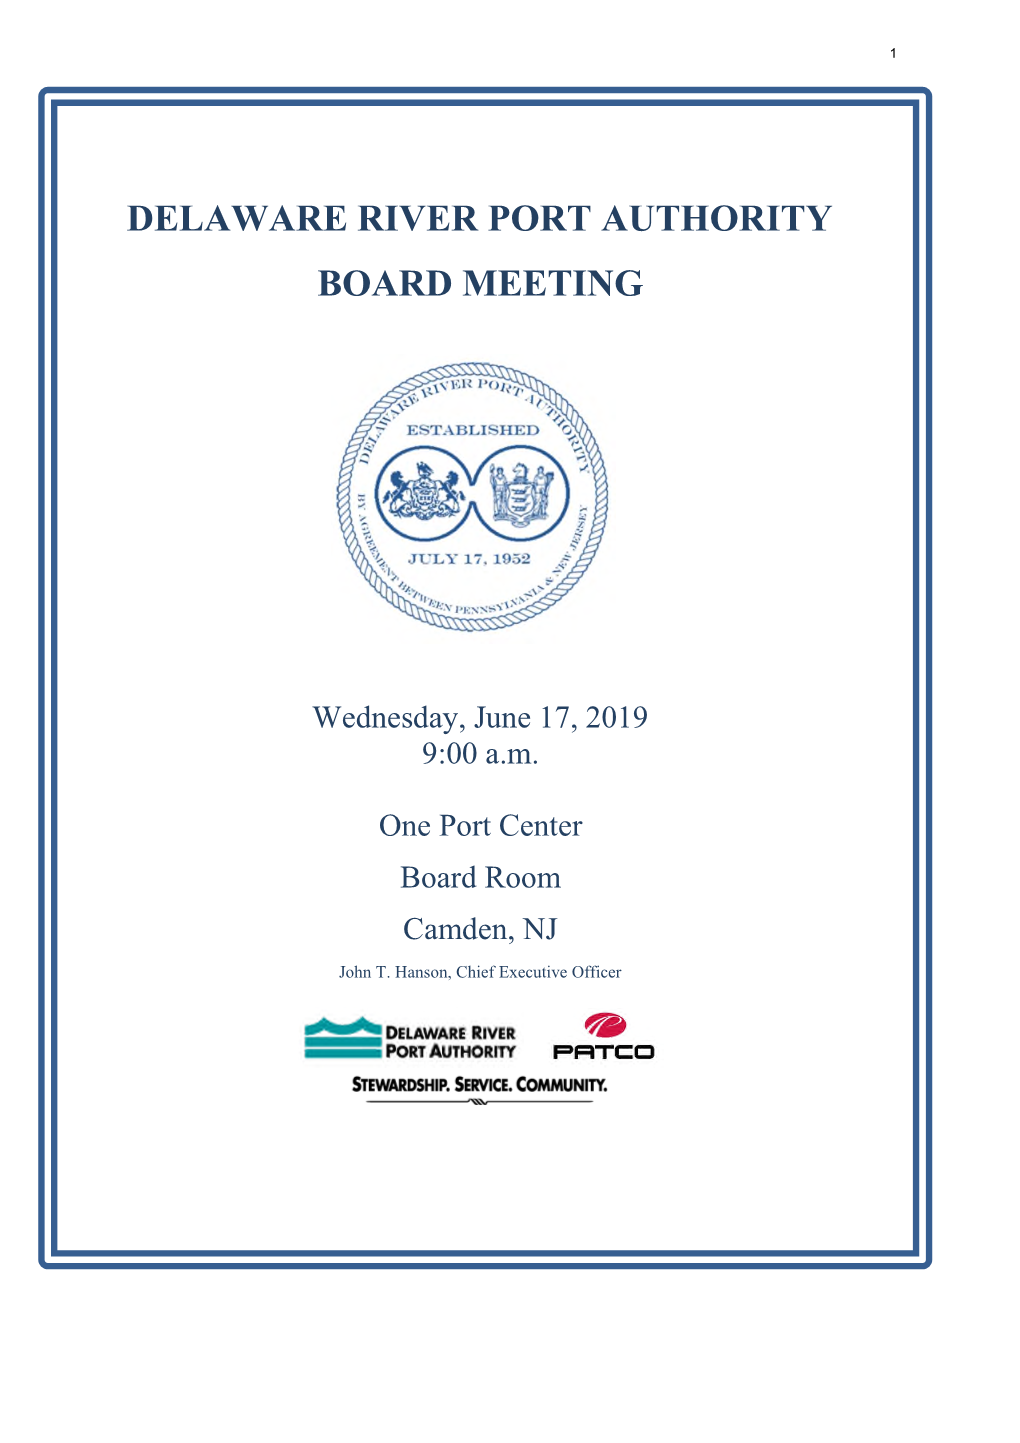 Delaware River Port Authority Board Meeting